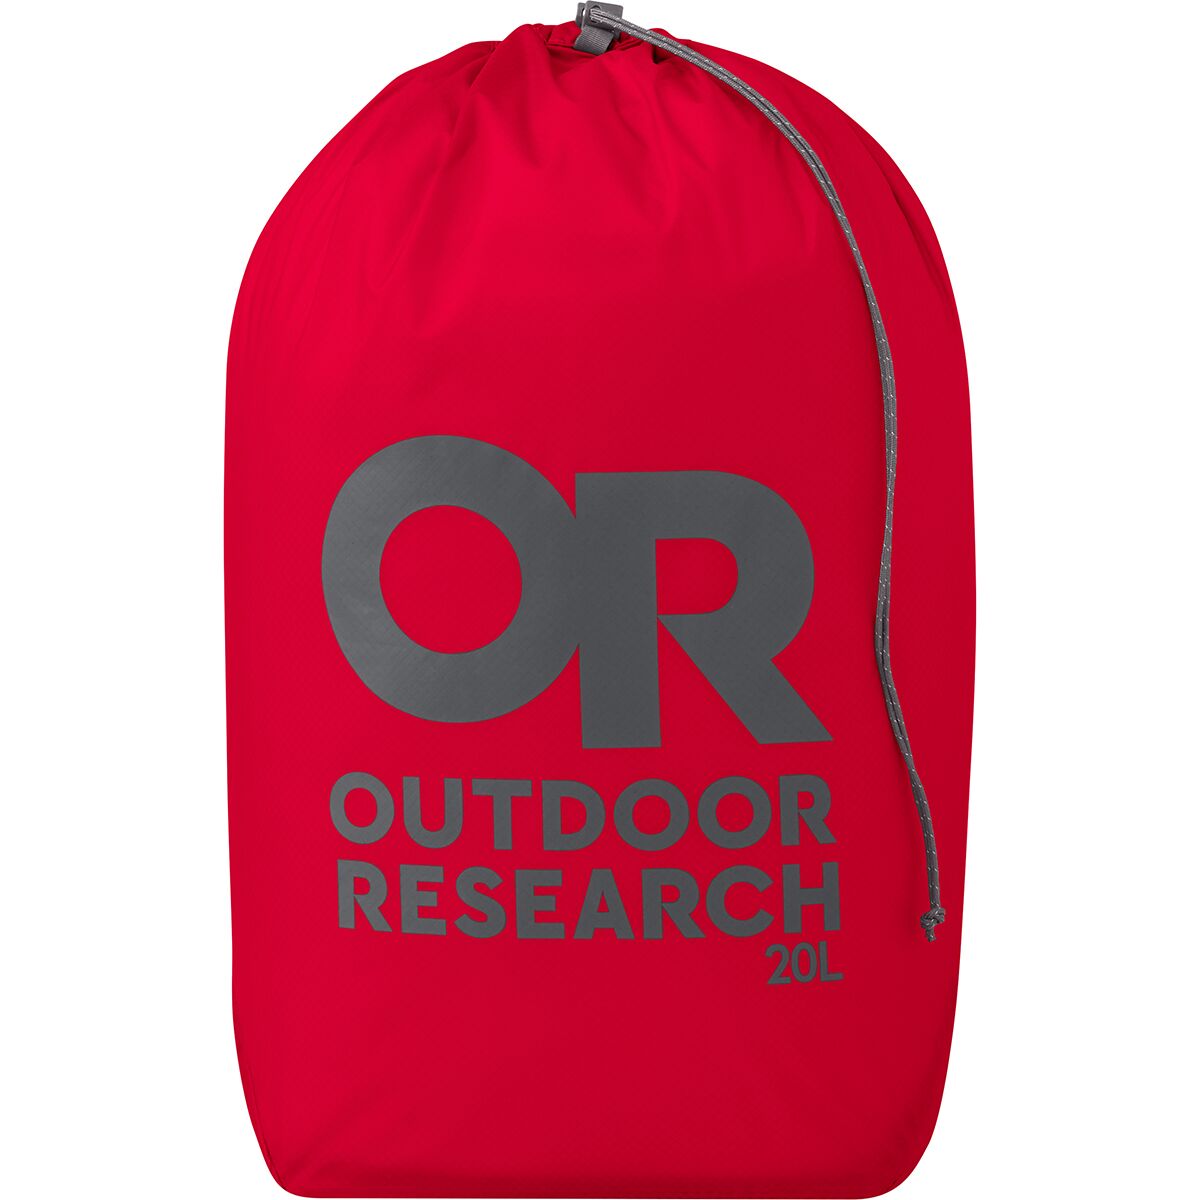 Outdoor Research PackOut Ultralight 20L Stuff Sack